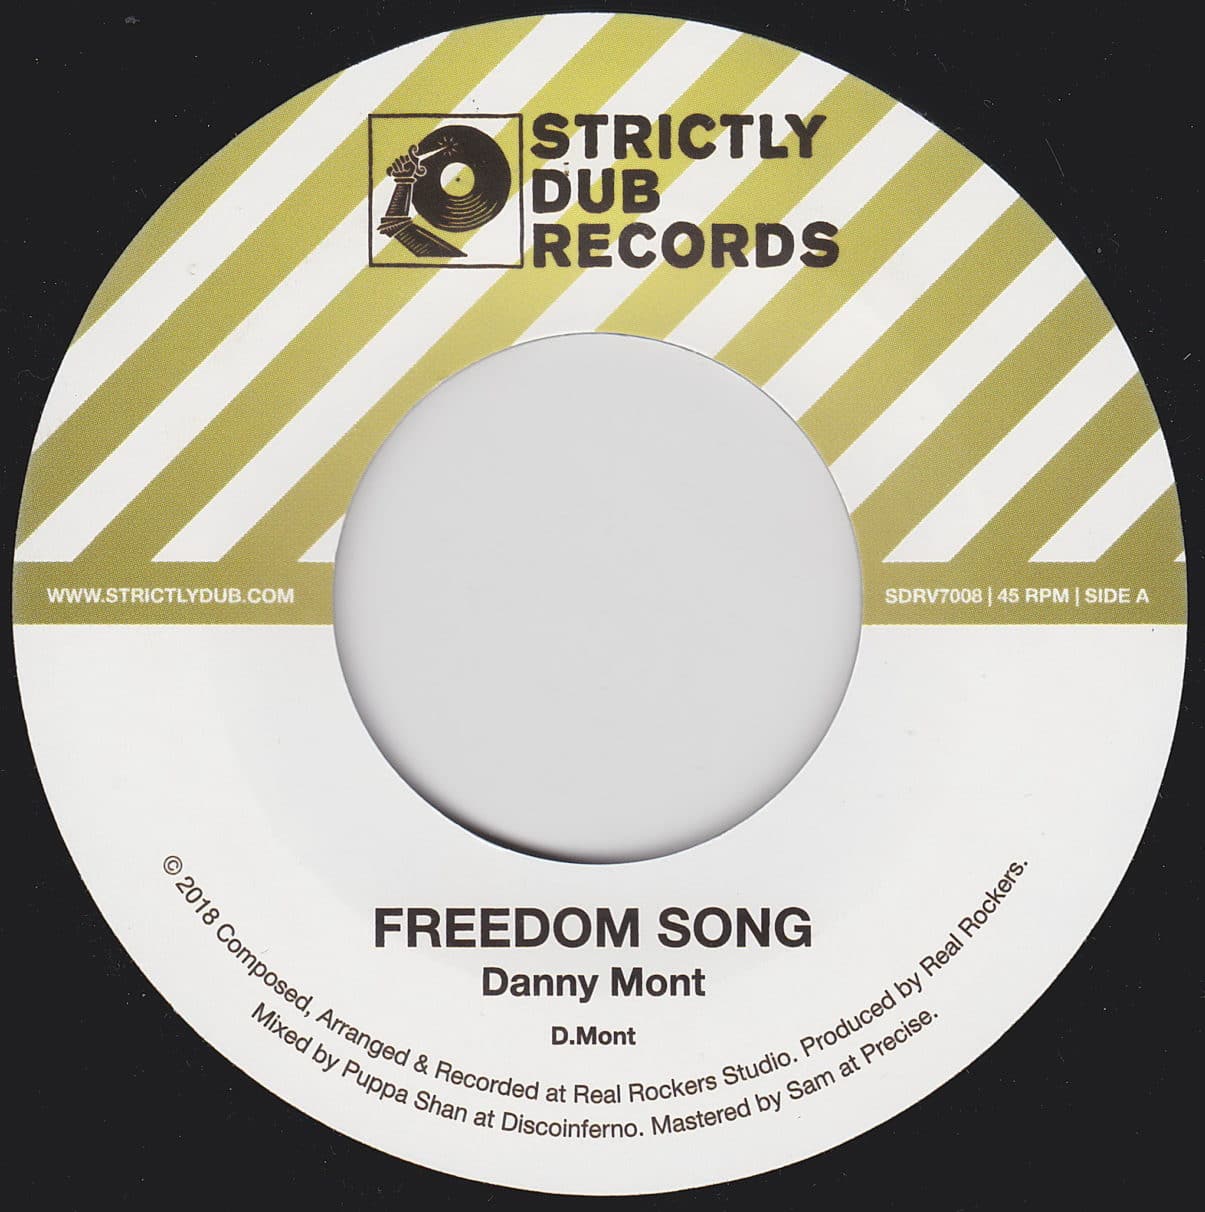 Danny Mont/Puppa Shan - Freedom Song - SDRV7008 - STRICTLY DUB RECORDS